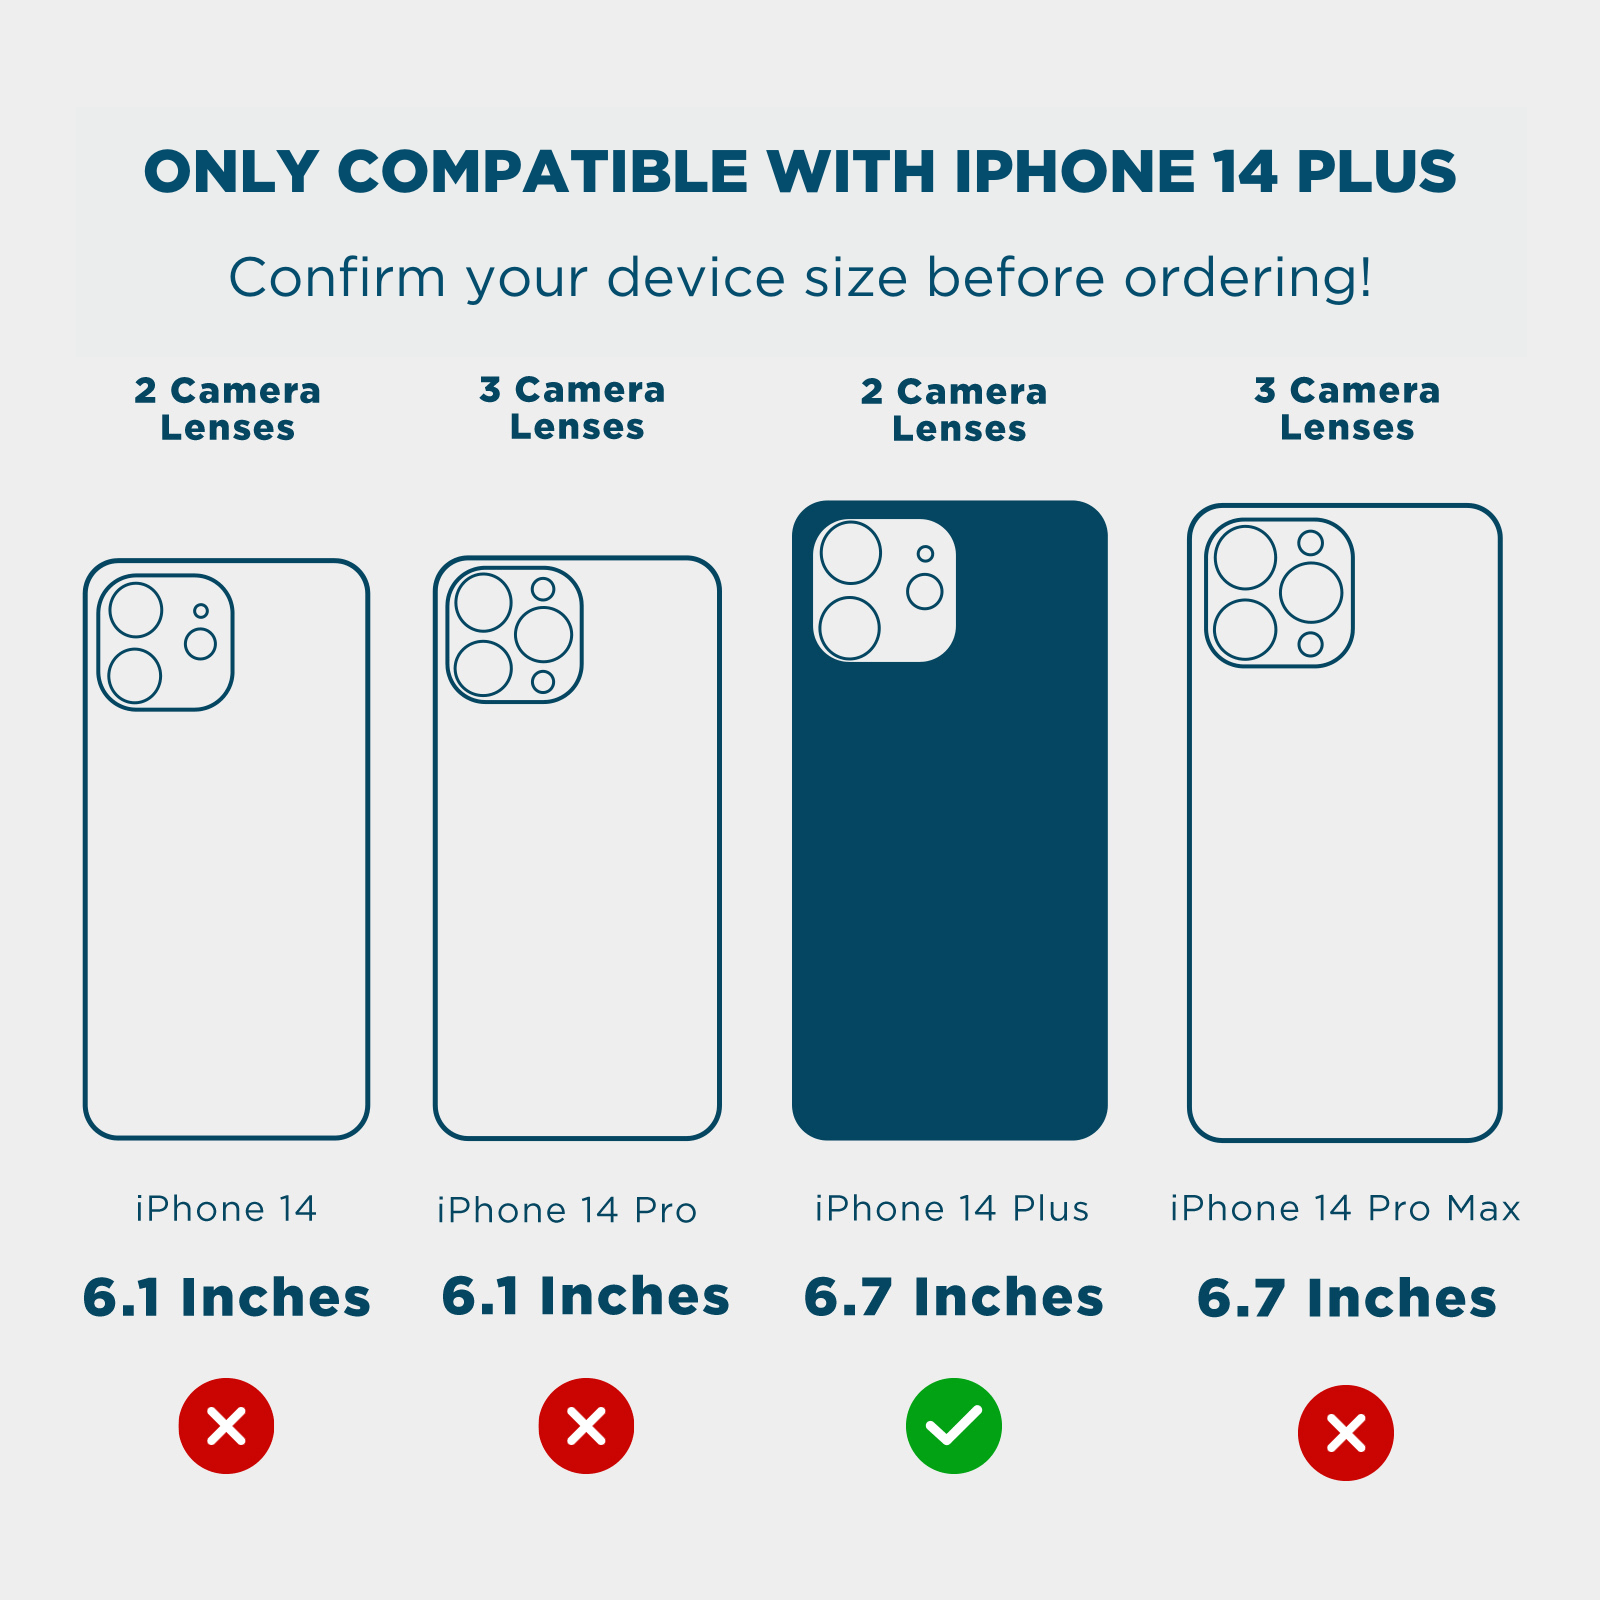 ONLY COMPATIBLE WITH IPHONE 14 PLUS. CONFIRM YOUR DEVICE SIZE BEFORE ORDERING! 2 CAMERA LENSES, 3 CAMERA LENSES, 2 CAMERA LENSES, 3 CAMERA LENSES, 6.1 INCHEC, 6.1 INCHES, 6.7 INCHES, 6.7 INCHES. COLOR::CLAY PINK